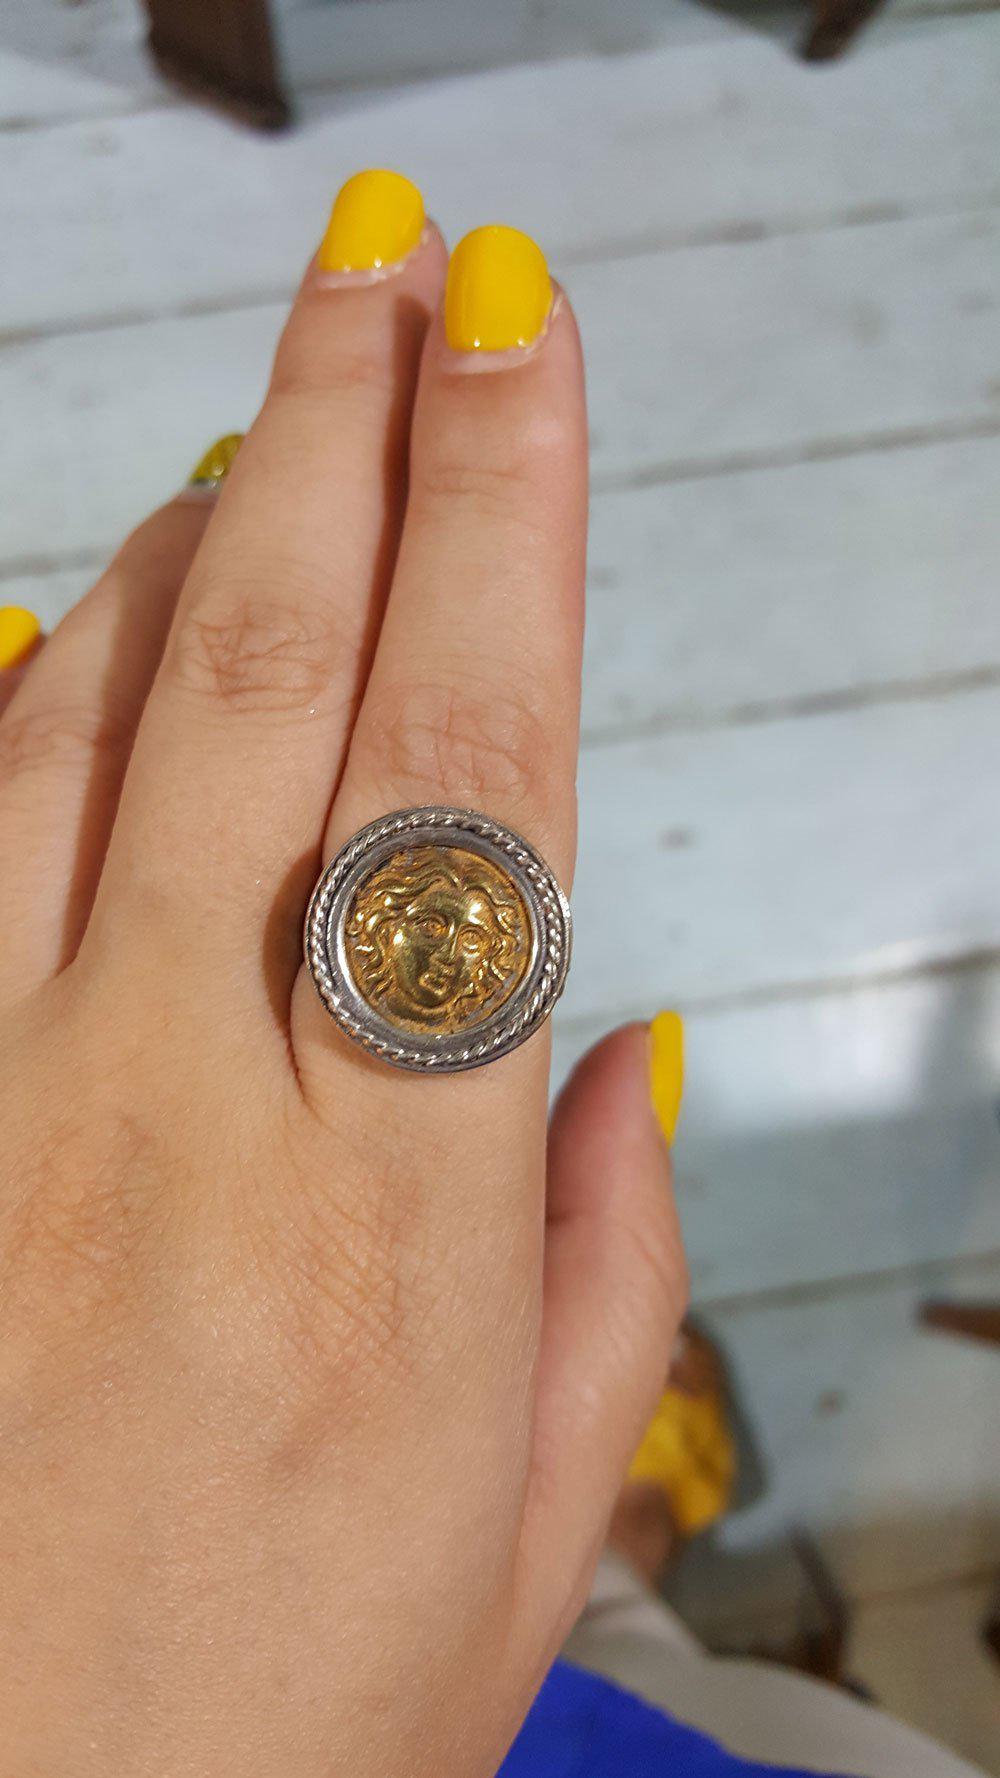 Helios ancient sun god and rose ring, Ancient Coinage of Rhodes, Art Nouveau Ring, Sterling silver Ring (DT-104)